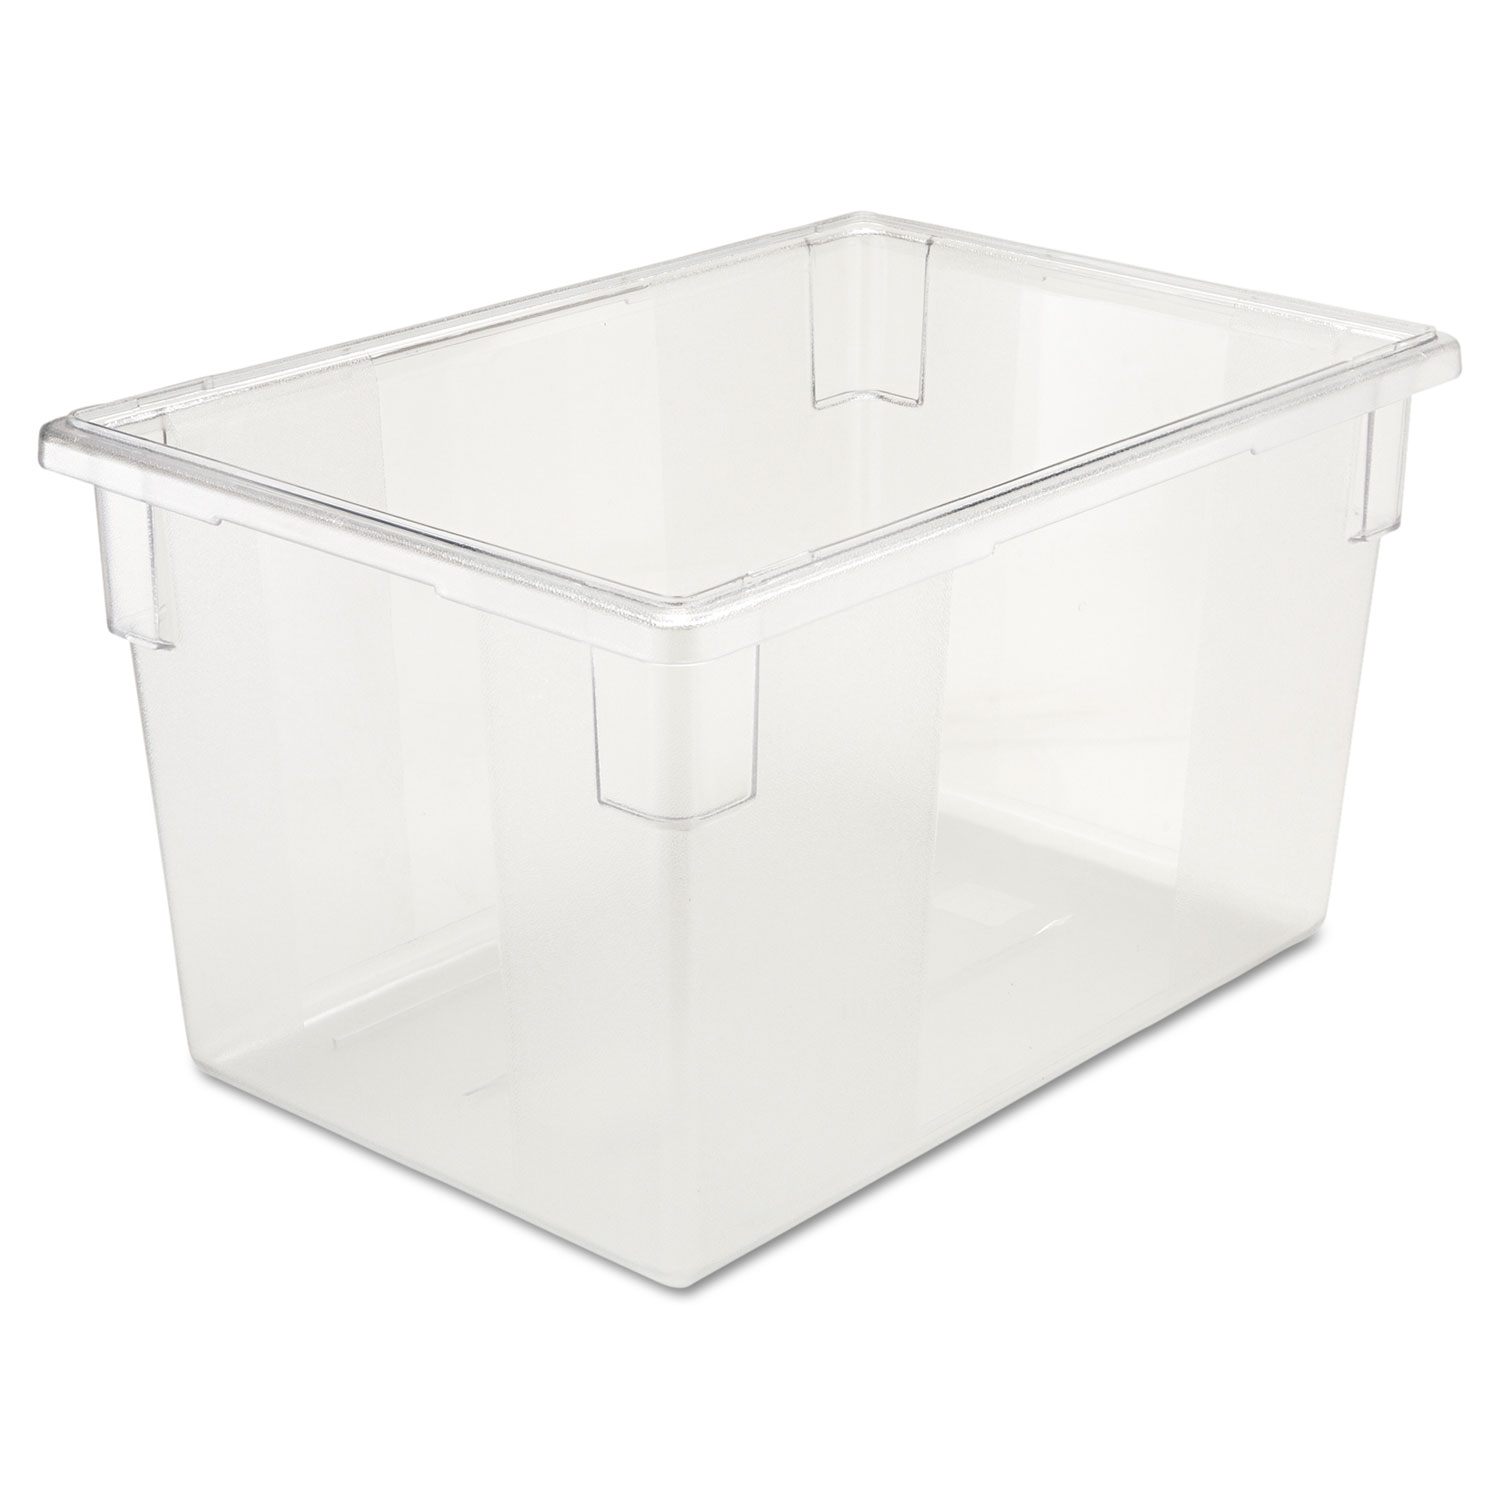  Rubbermaid Commercial 330100CLR Food/Tote Boxes, 21 1/2gal, 26w x 18d x 15h, Clear (RCP3301CLE) 